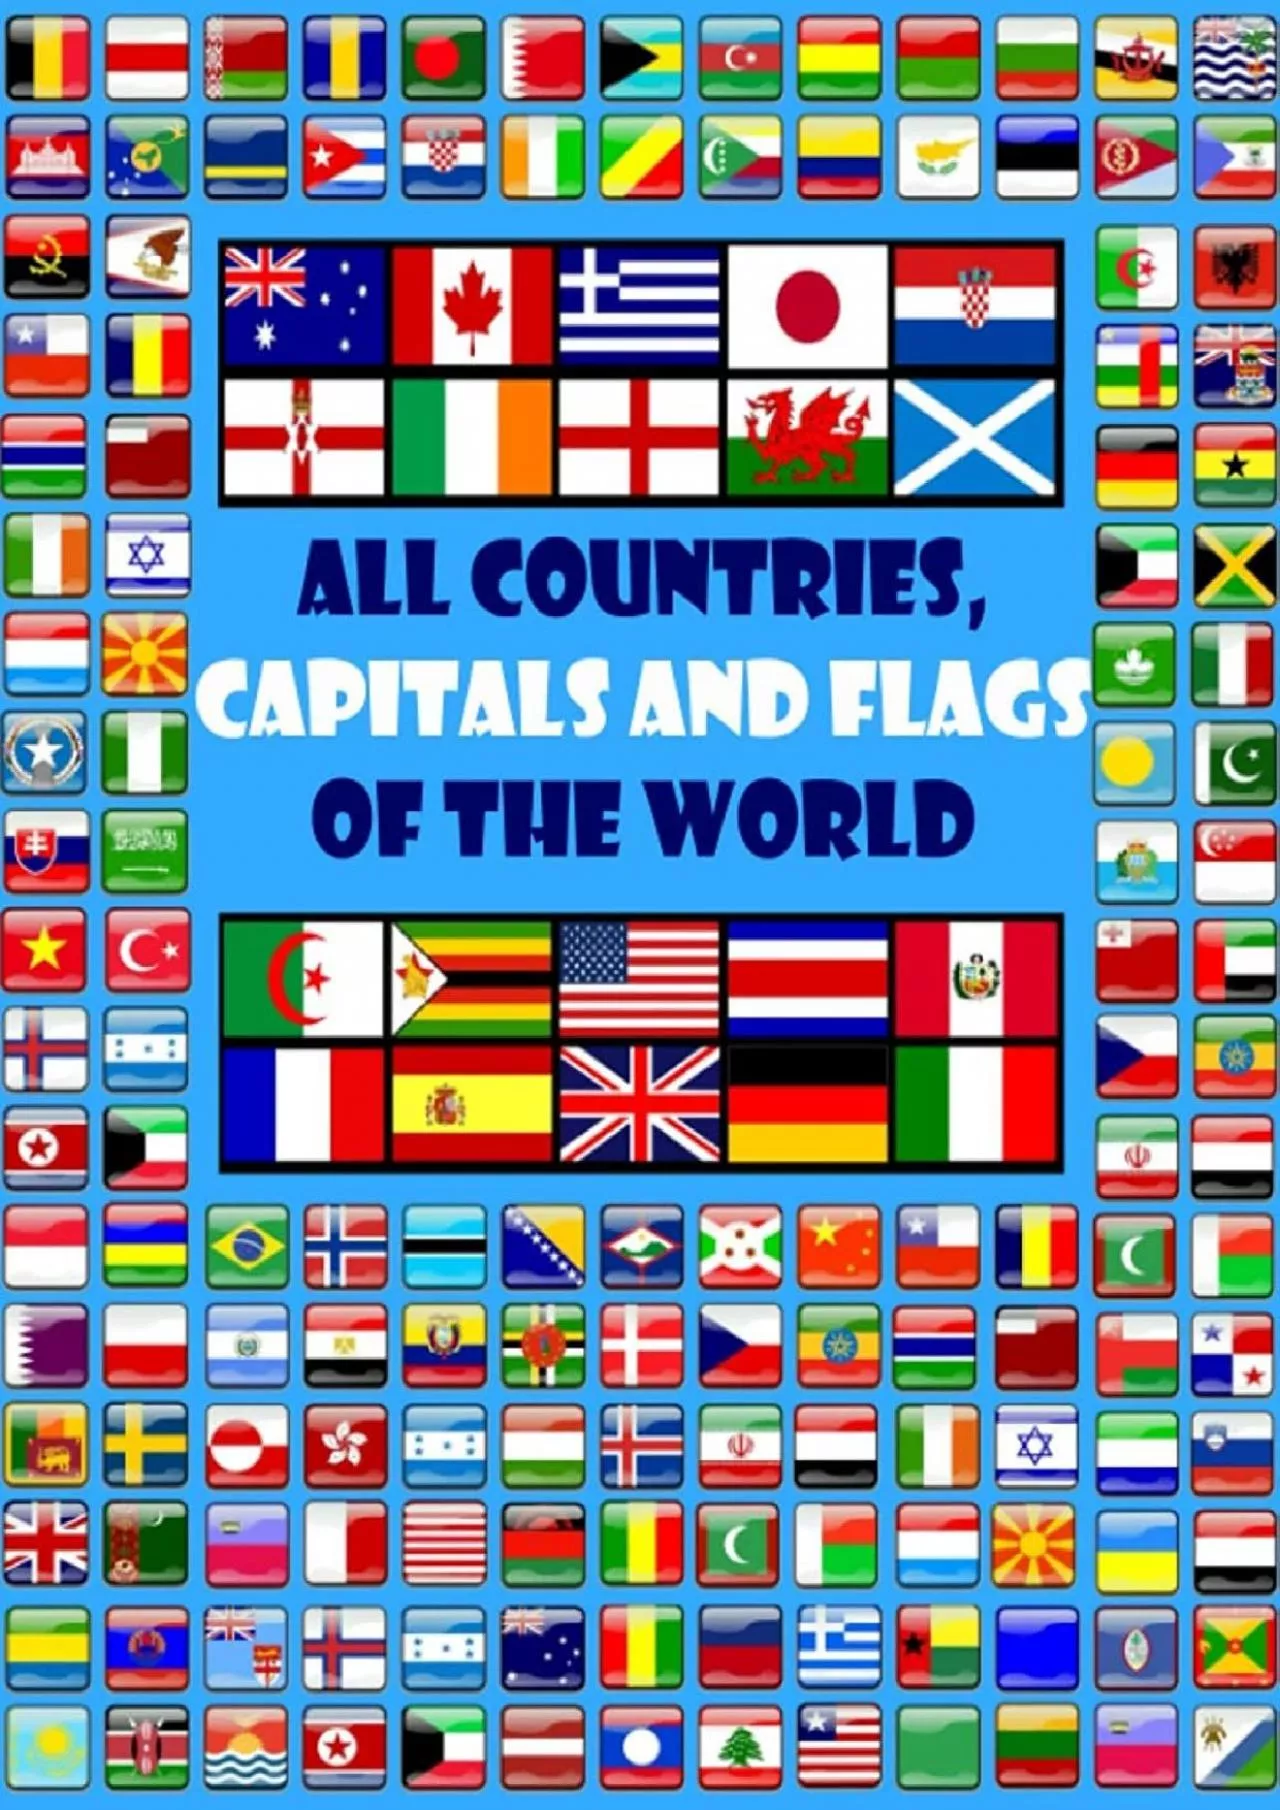 [DOWNLOAD] All countries, capitals and flags of the world: A guide to flags from around